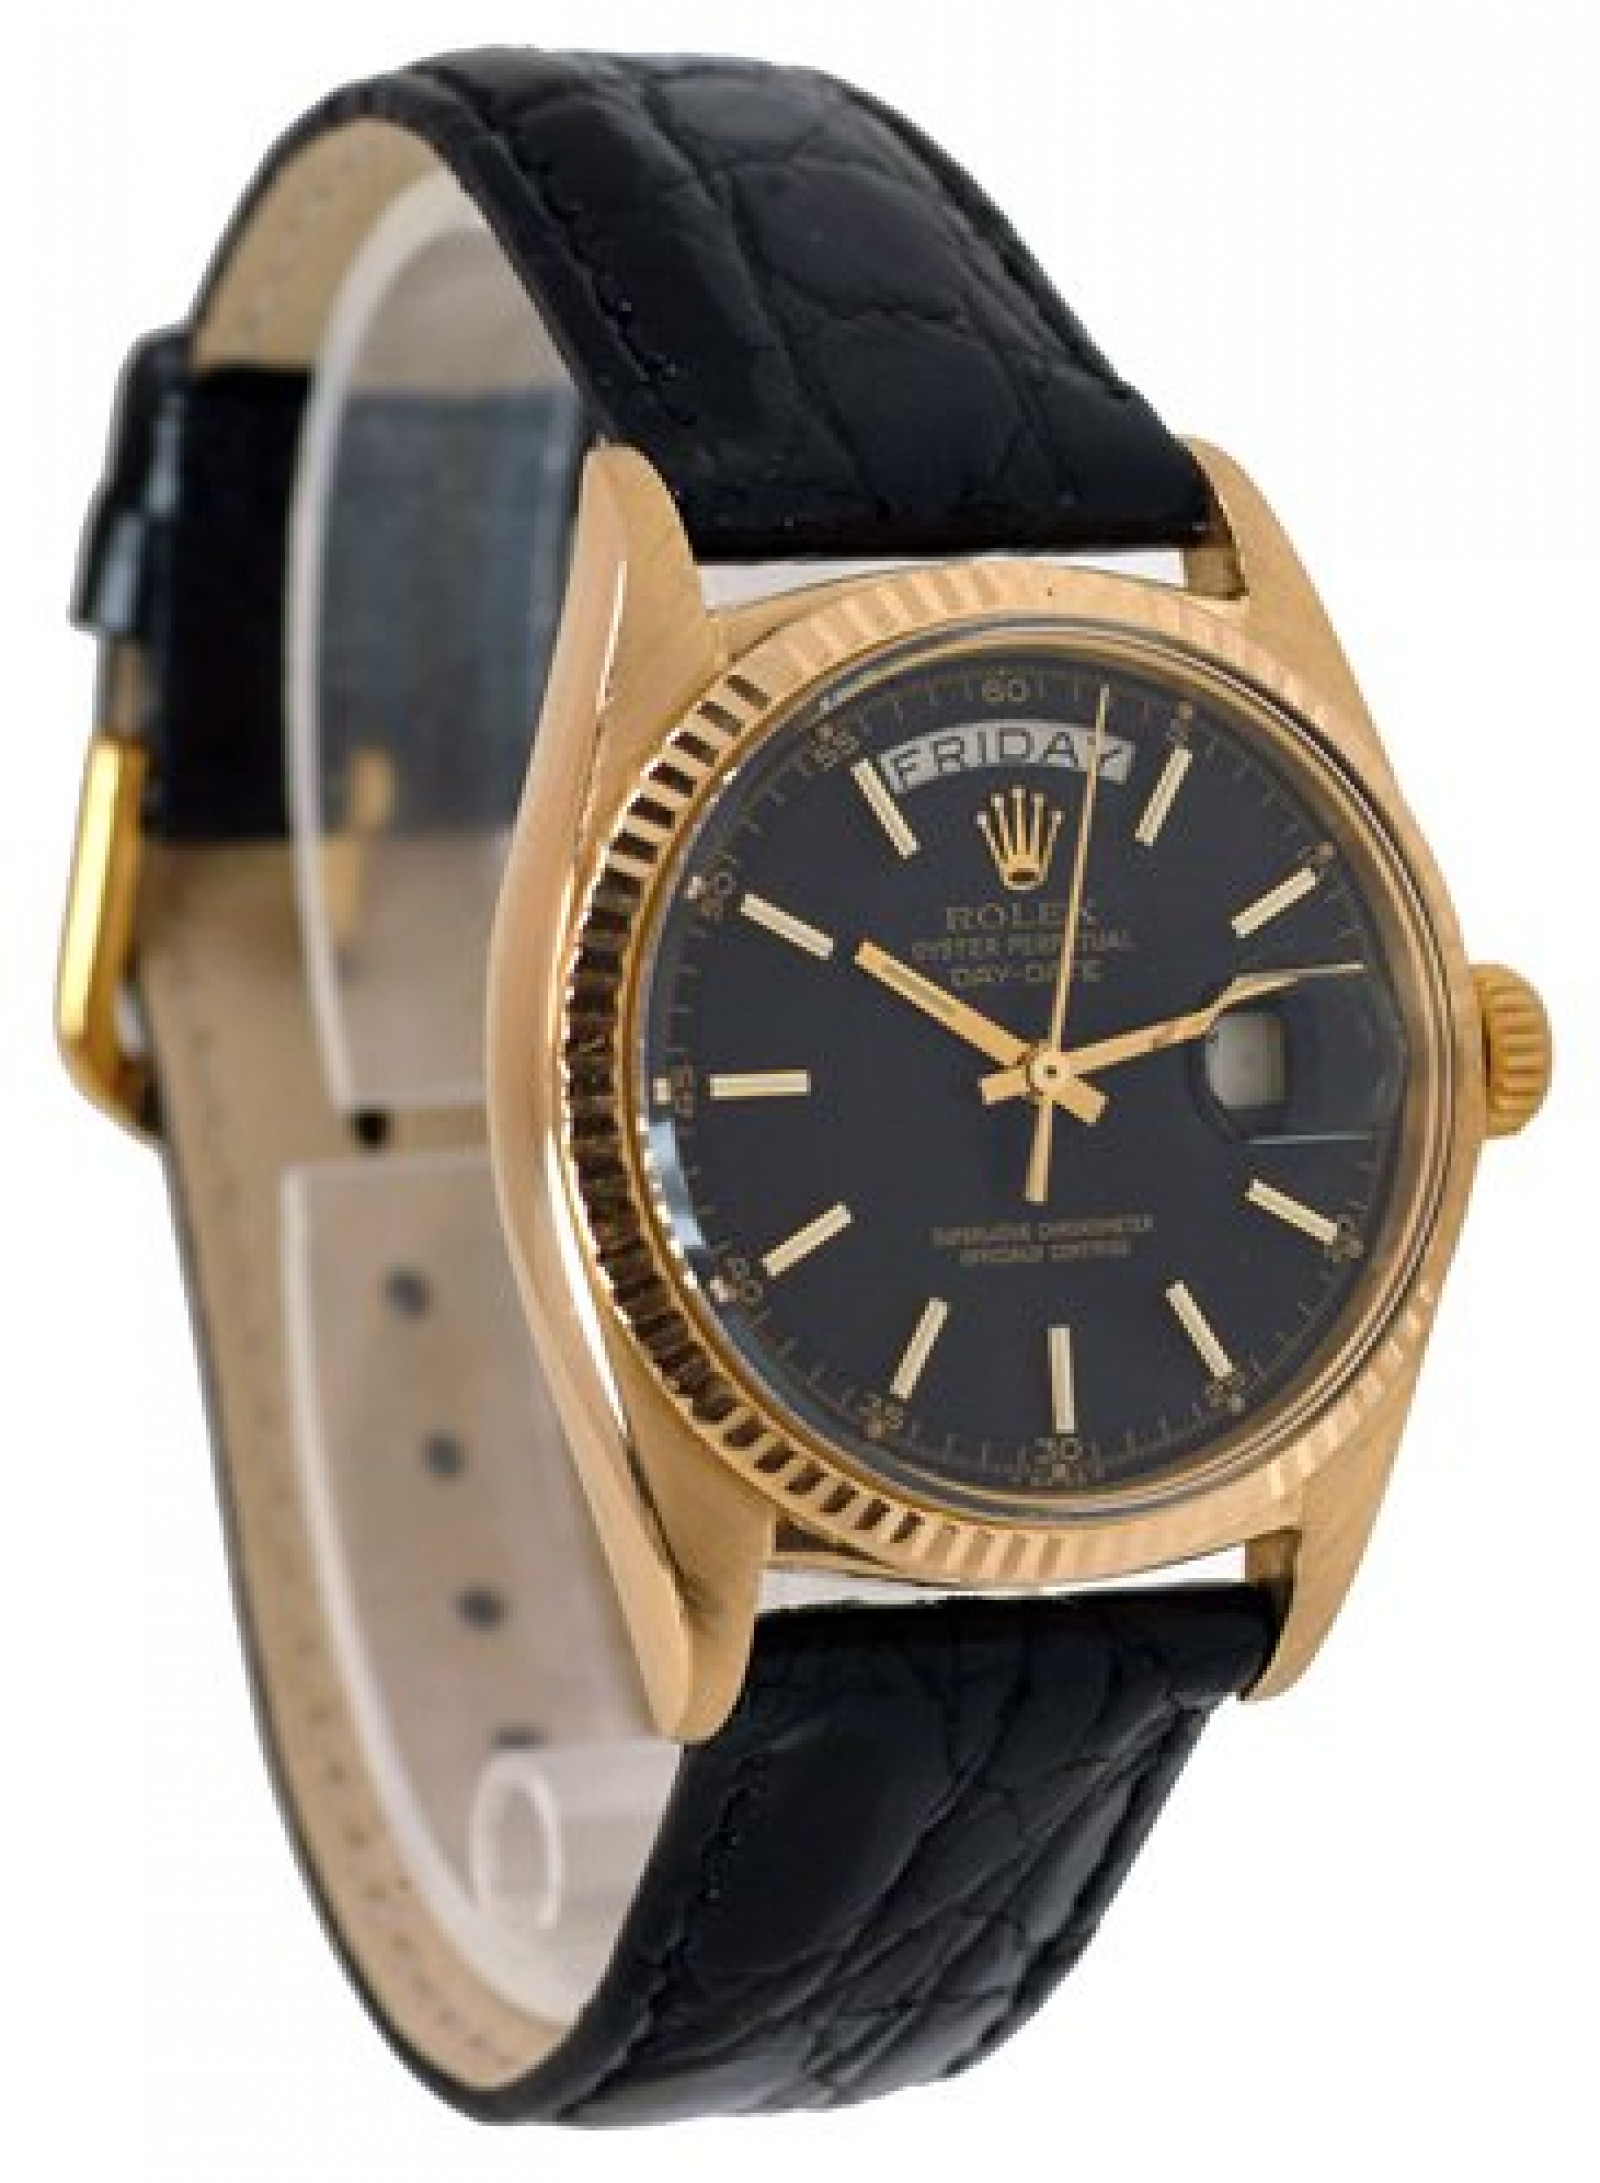 Vintage Rolex Day-Date 1803 Gold Year 1969 with Black Dial 1969